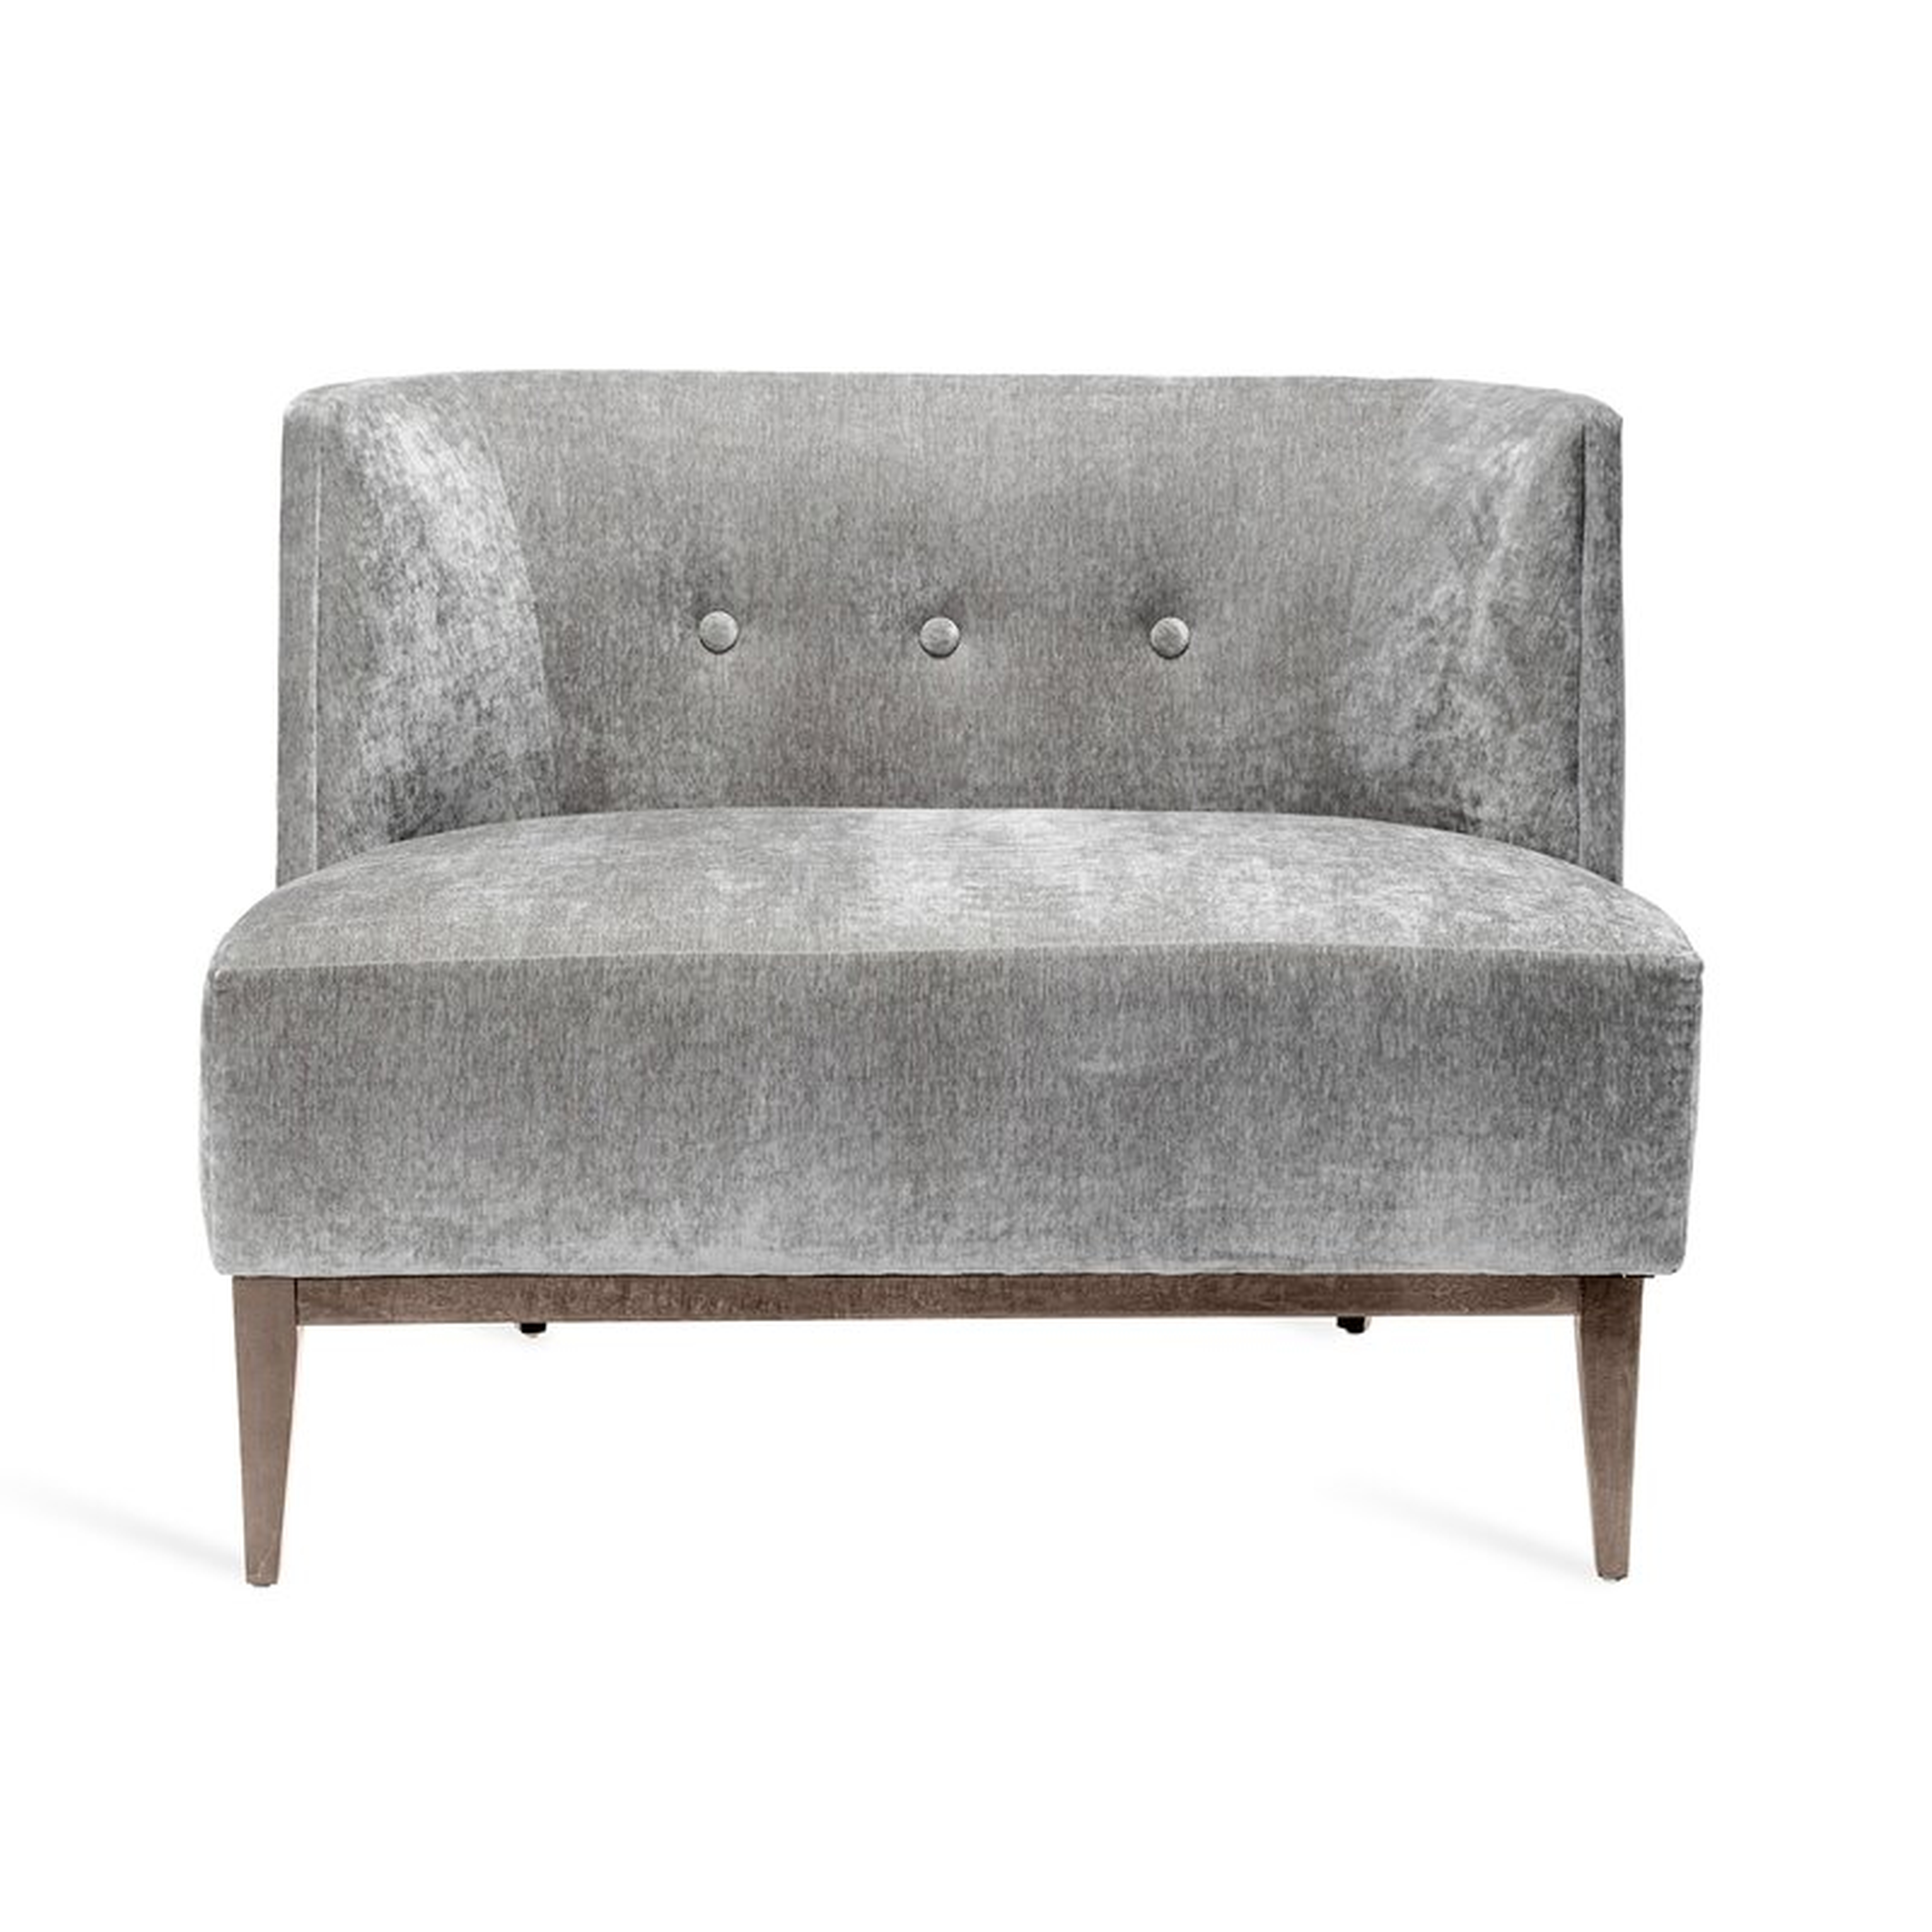 Interlude Chloe Lounge Chair Upholstery Color: Granite - Perigold